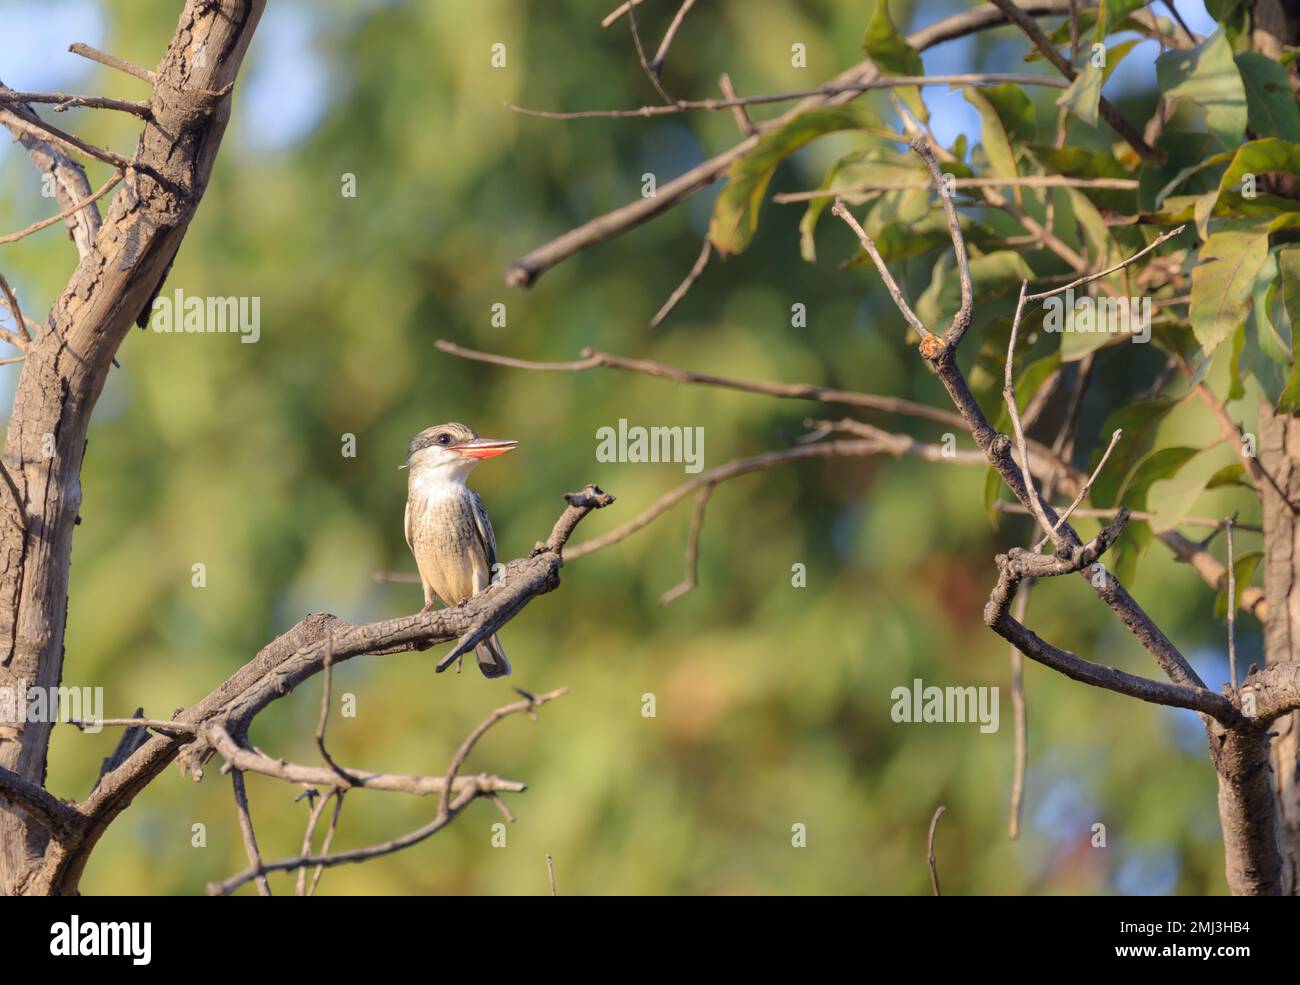 Striped kingfisher (Halcyon chelicuti), perched on branch, Gambia, Africa Stock Photo